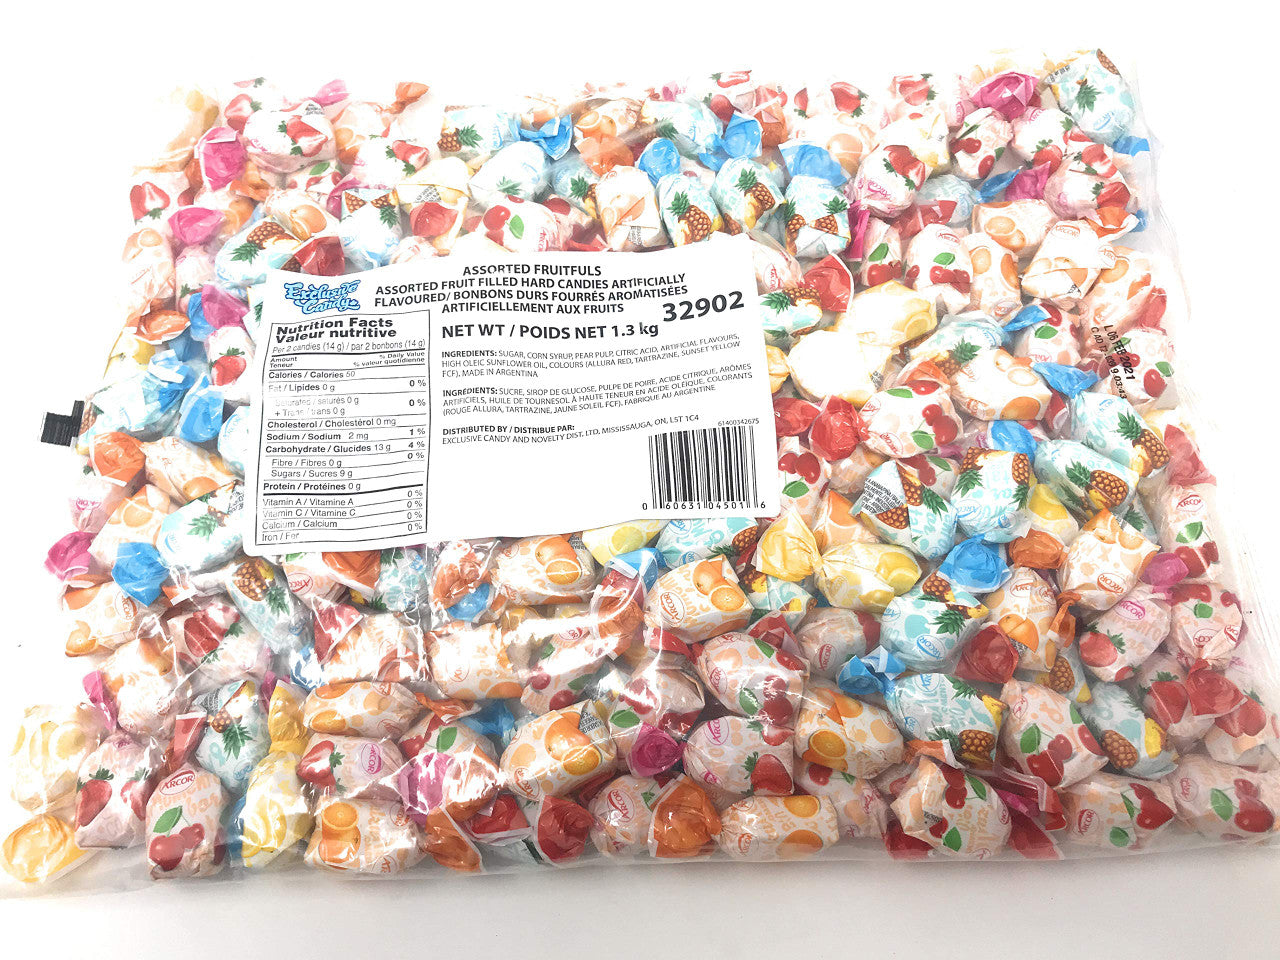 Exclusive Candy Assorted Fruit Filled Hard Candies - 1.3kg/2.9lb. Bag, {Imported from Canada}